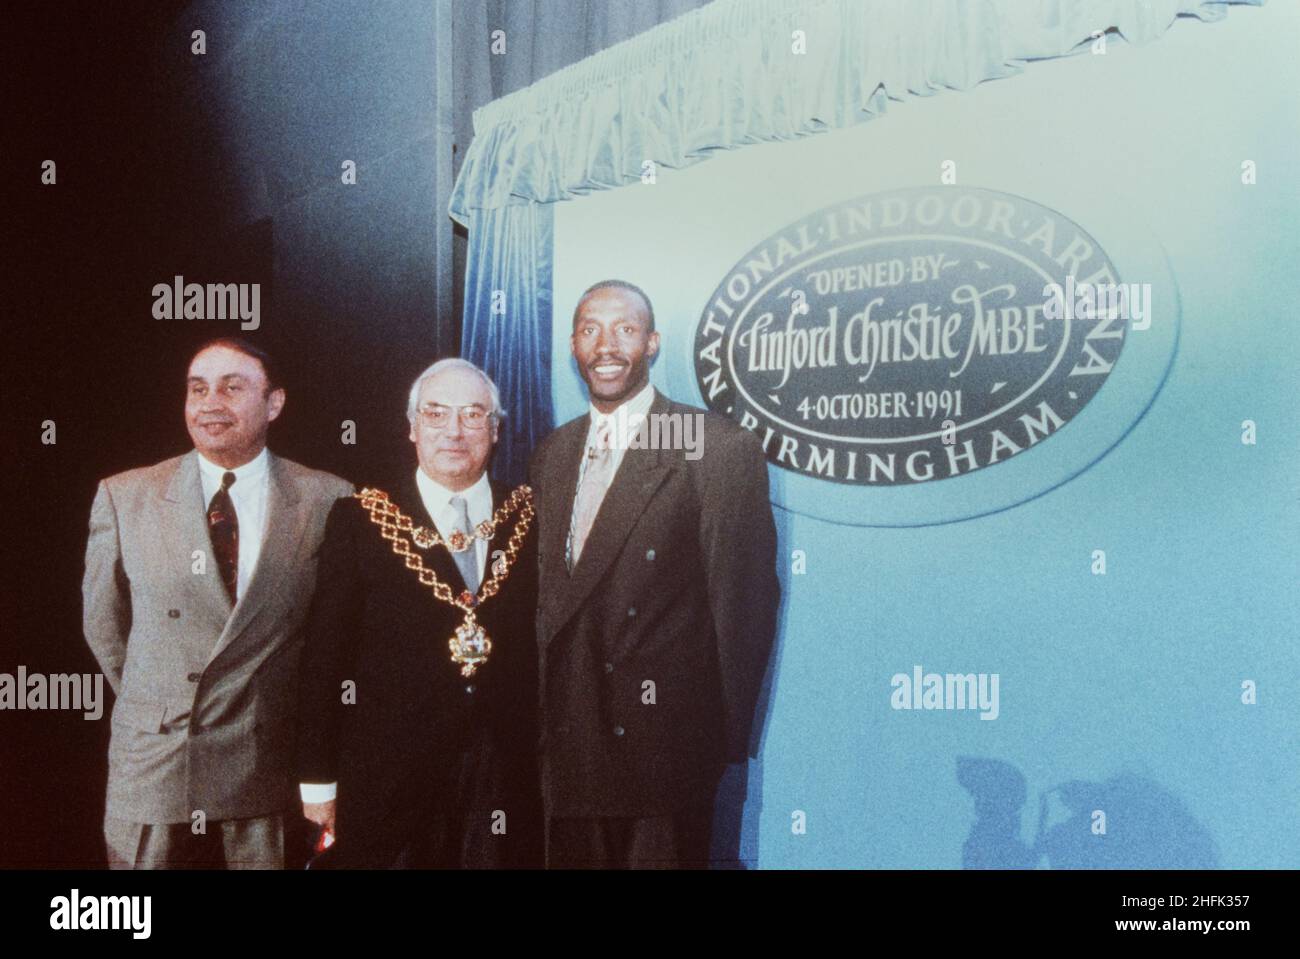 National Indoor Arena, King Edwards Road, Birmingham, 04/10/1991. Athlete Linford Christie, the Lord Mayor of Birmingham and a third man posed beside a commemorative plaque at the official opening of the National Indoor Arena in Birmingham. I/N is recorded next to this image in Laing's negative register, signifying that it is an internegative. It appears to have been copied from the original in November 1991. The &#xa3;50m Design and Construct contract for the National Indoor Arena (NIA) was awarded to the Laing Midlands Division by Birmingham City Council in January 1989. It was officially op Stock Photo